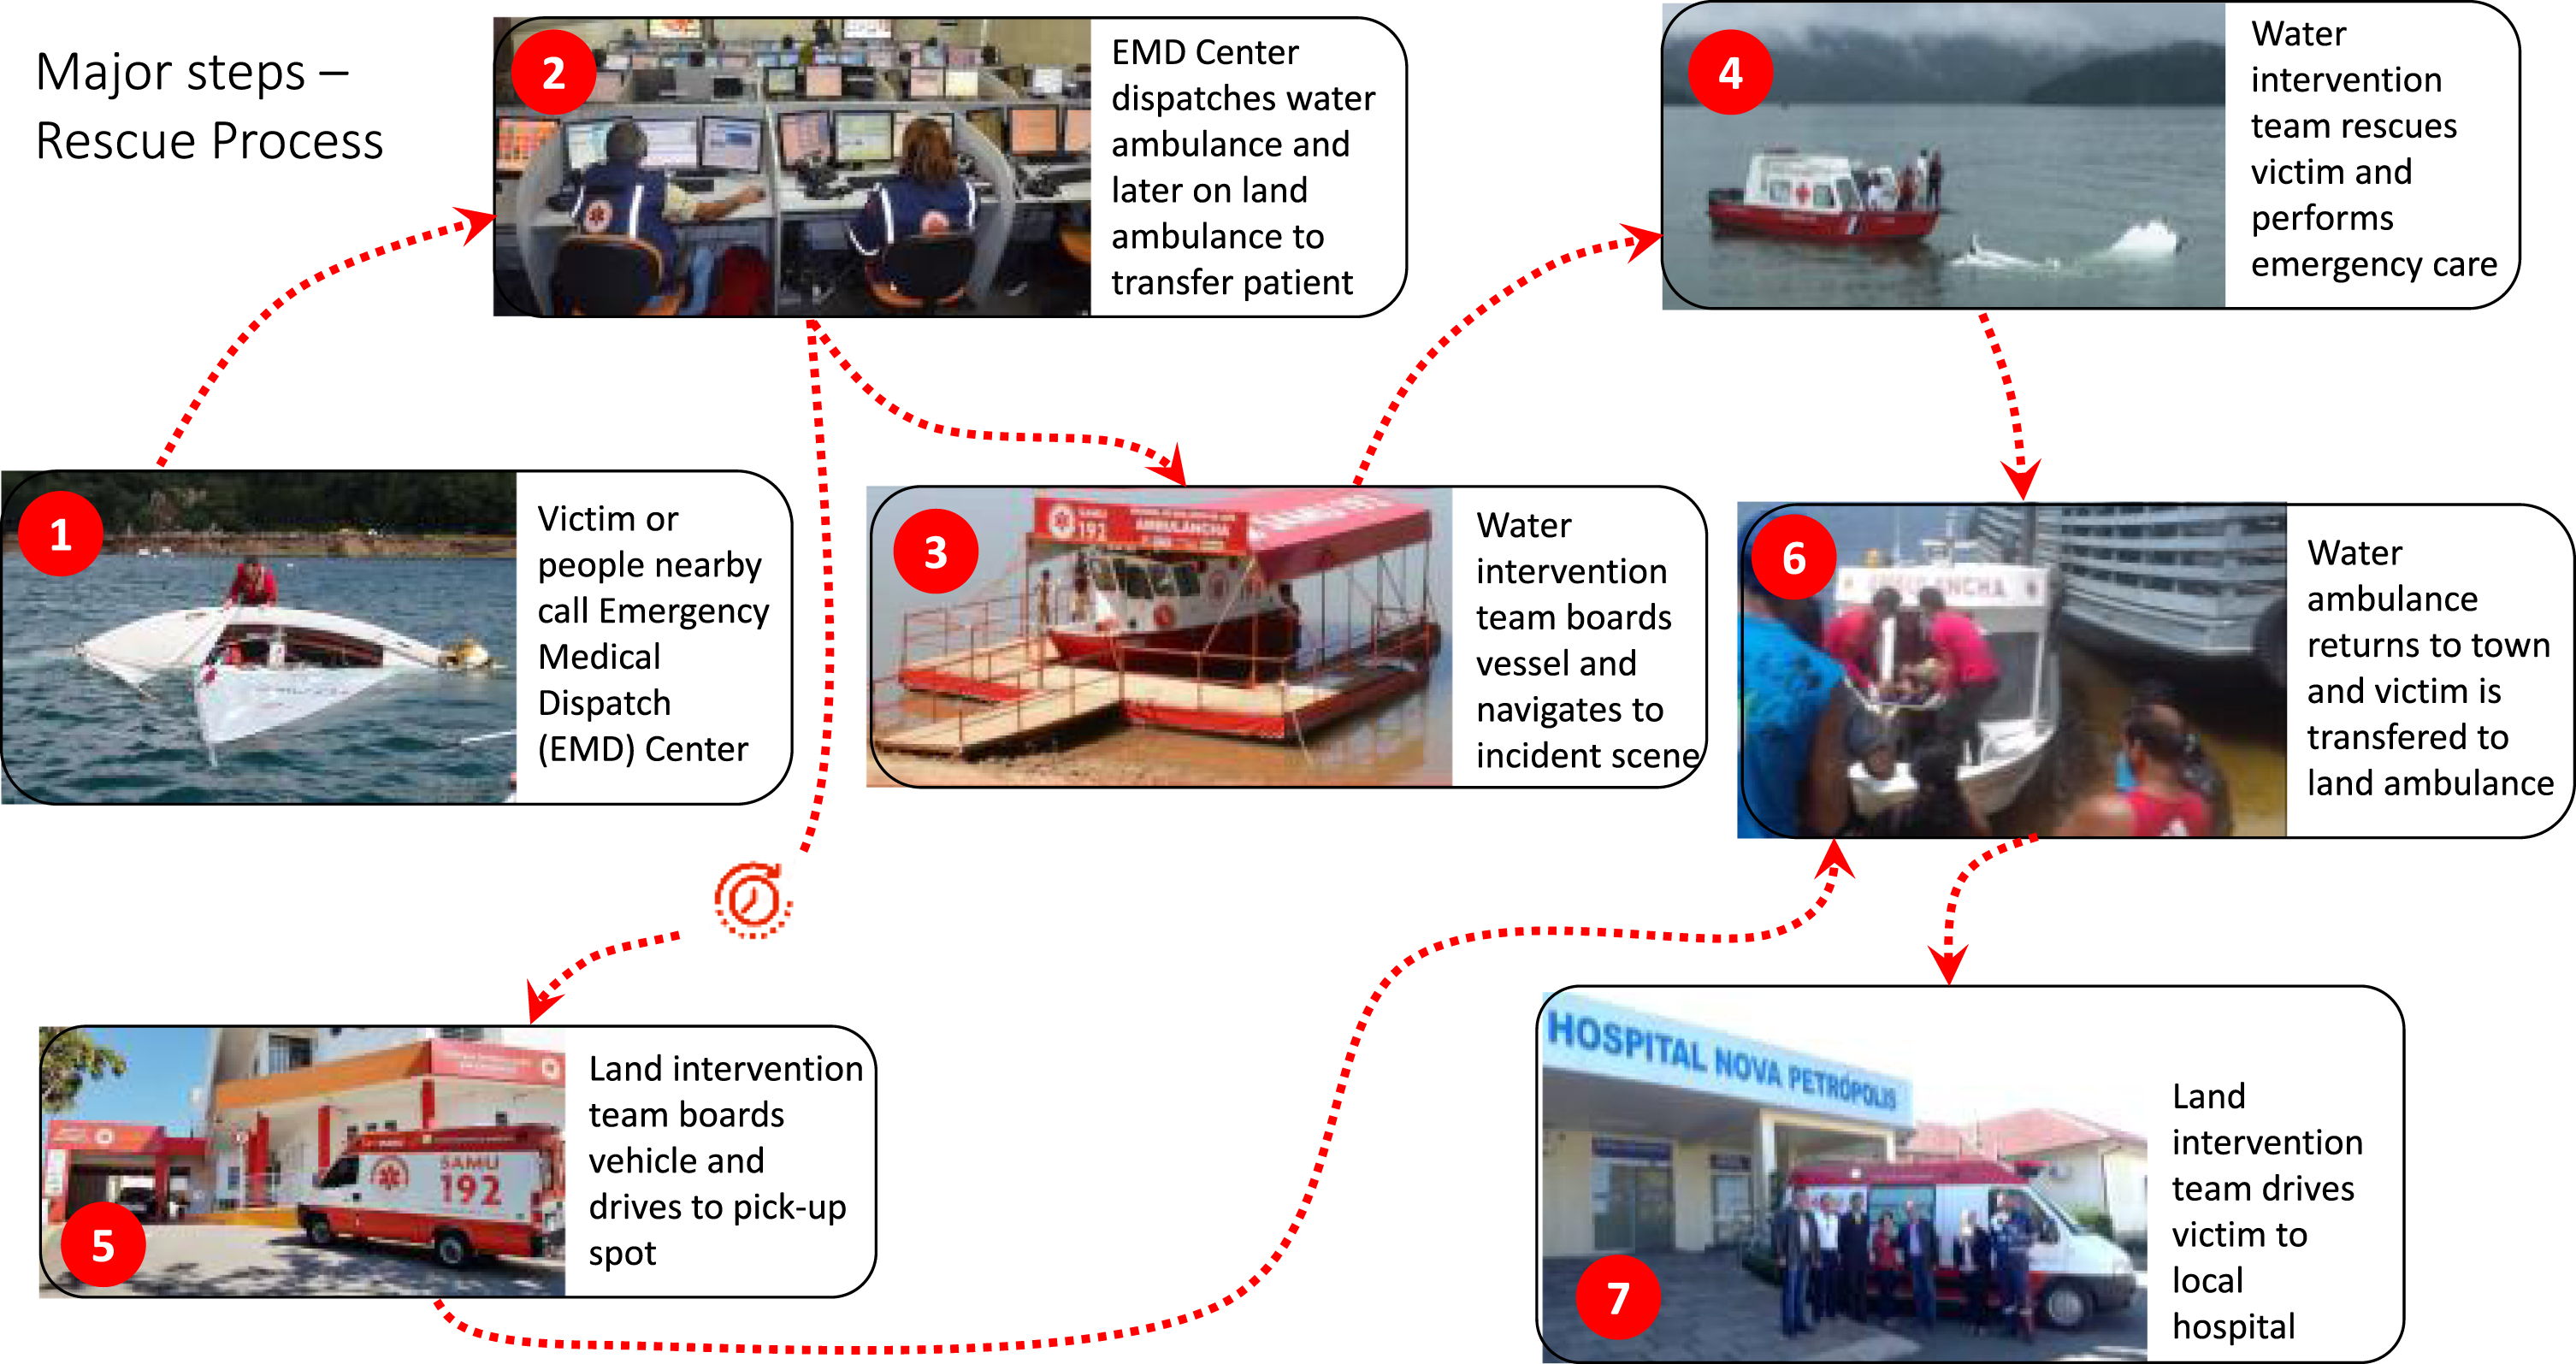 General SAMU rescue process for providing mobile emergency care to riverine and coastal populations.